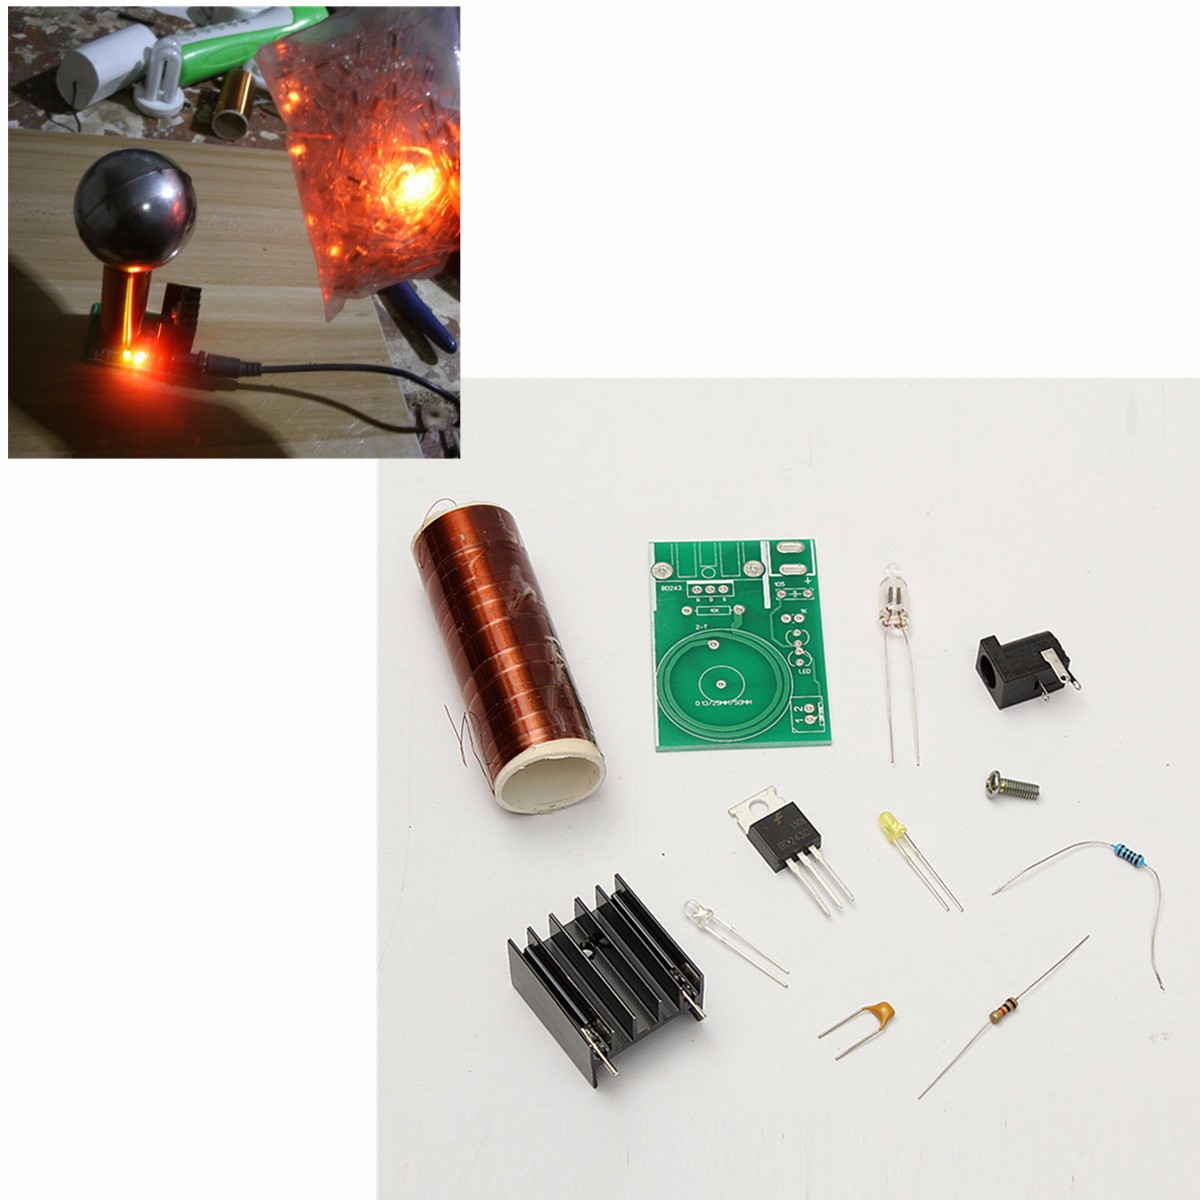 no Arc finished Tesla Coil,Mini Tesla Coil for Dry Battery Powered,No Arc Remote Ignition Tesla Electronic DIY Kit,no Electricity only Light